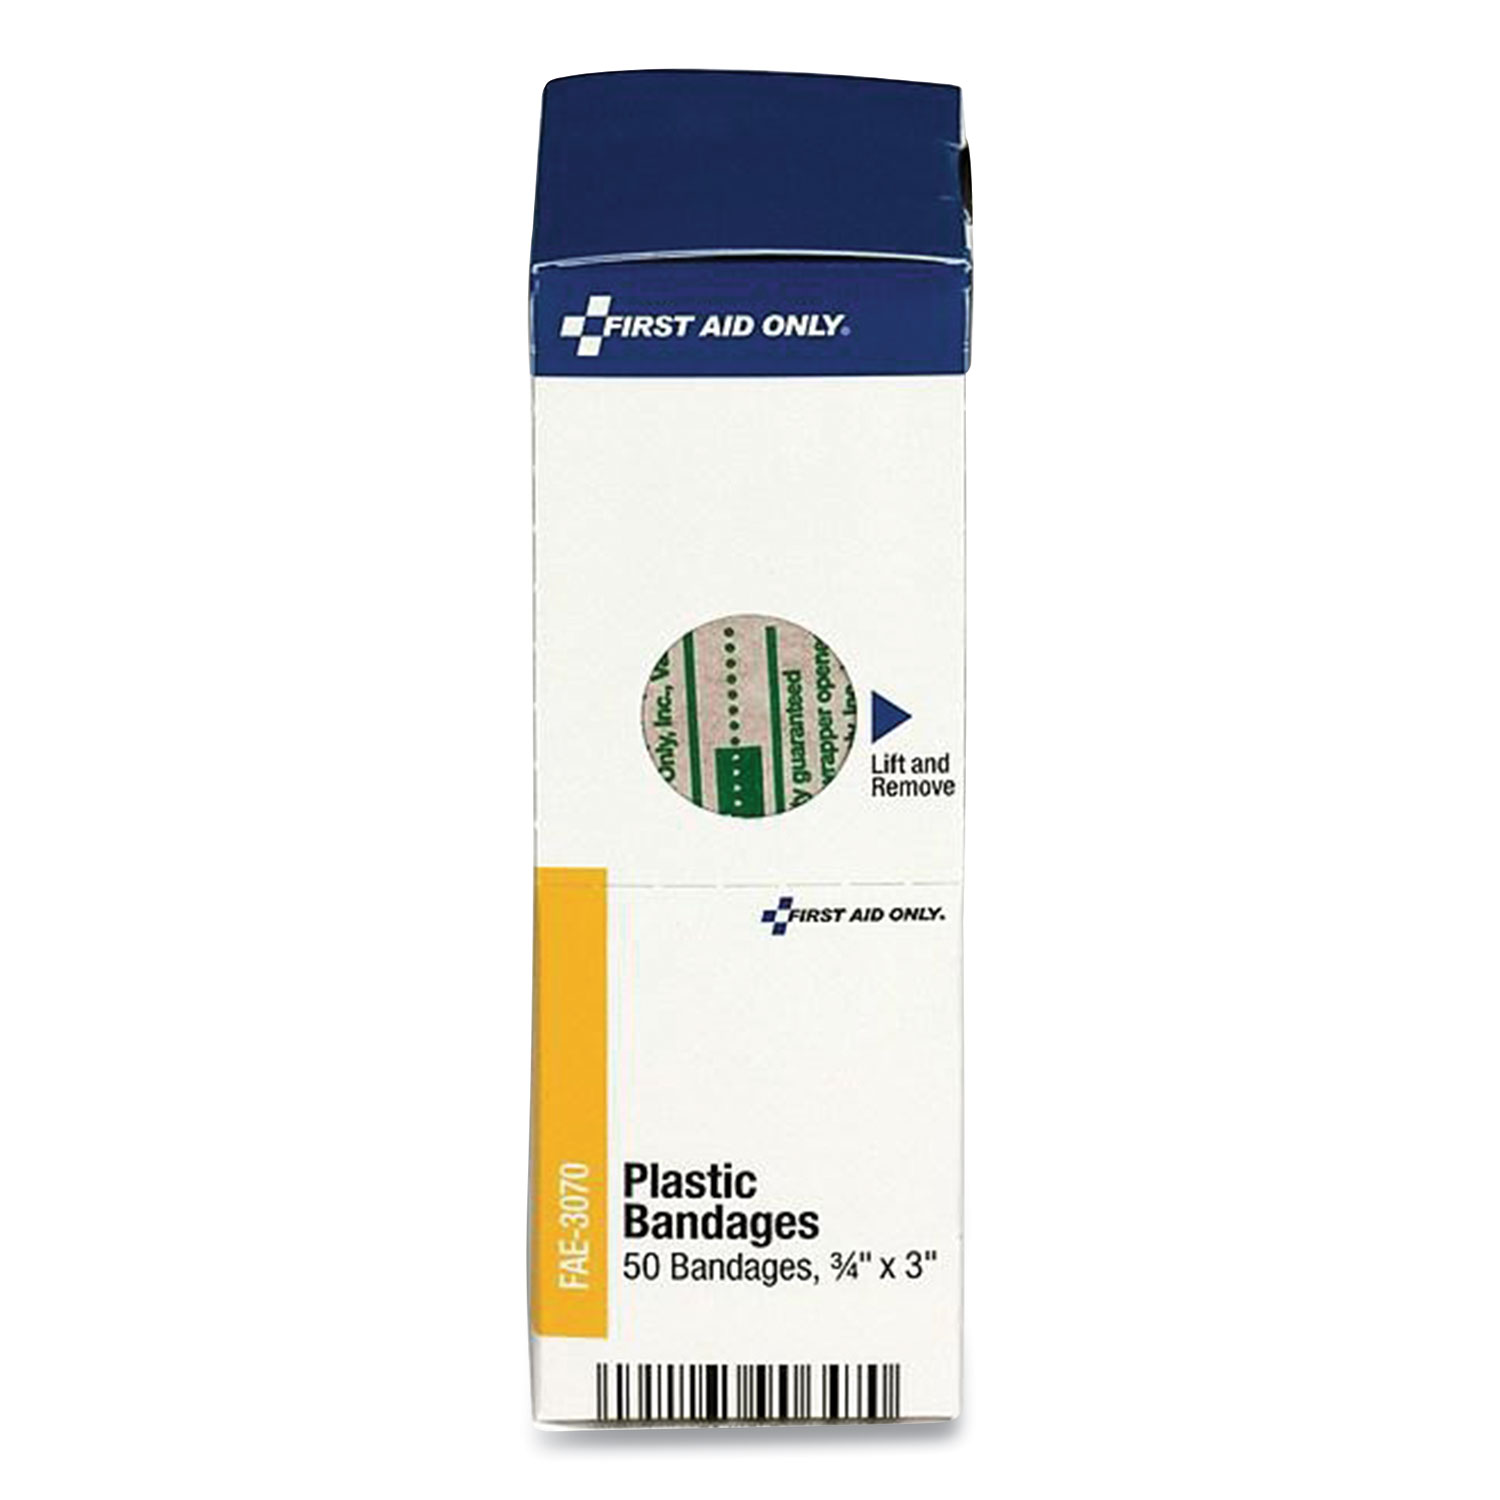  First Aid Only FAE-3070 Adhesive Plastic Bandages, 0.75 x 3, 50/Box (FAO199820) 